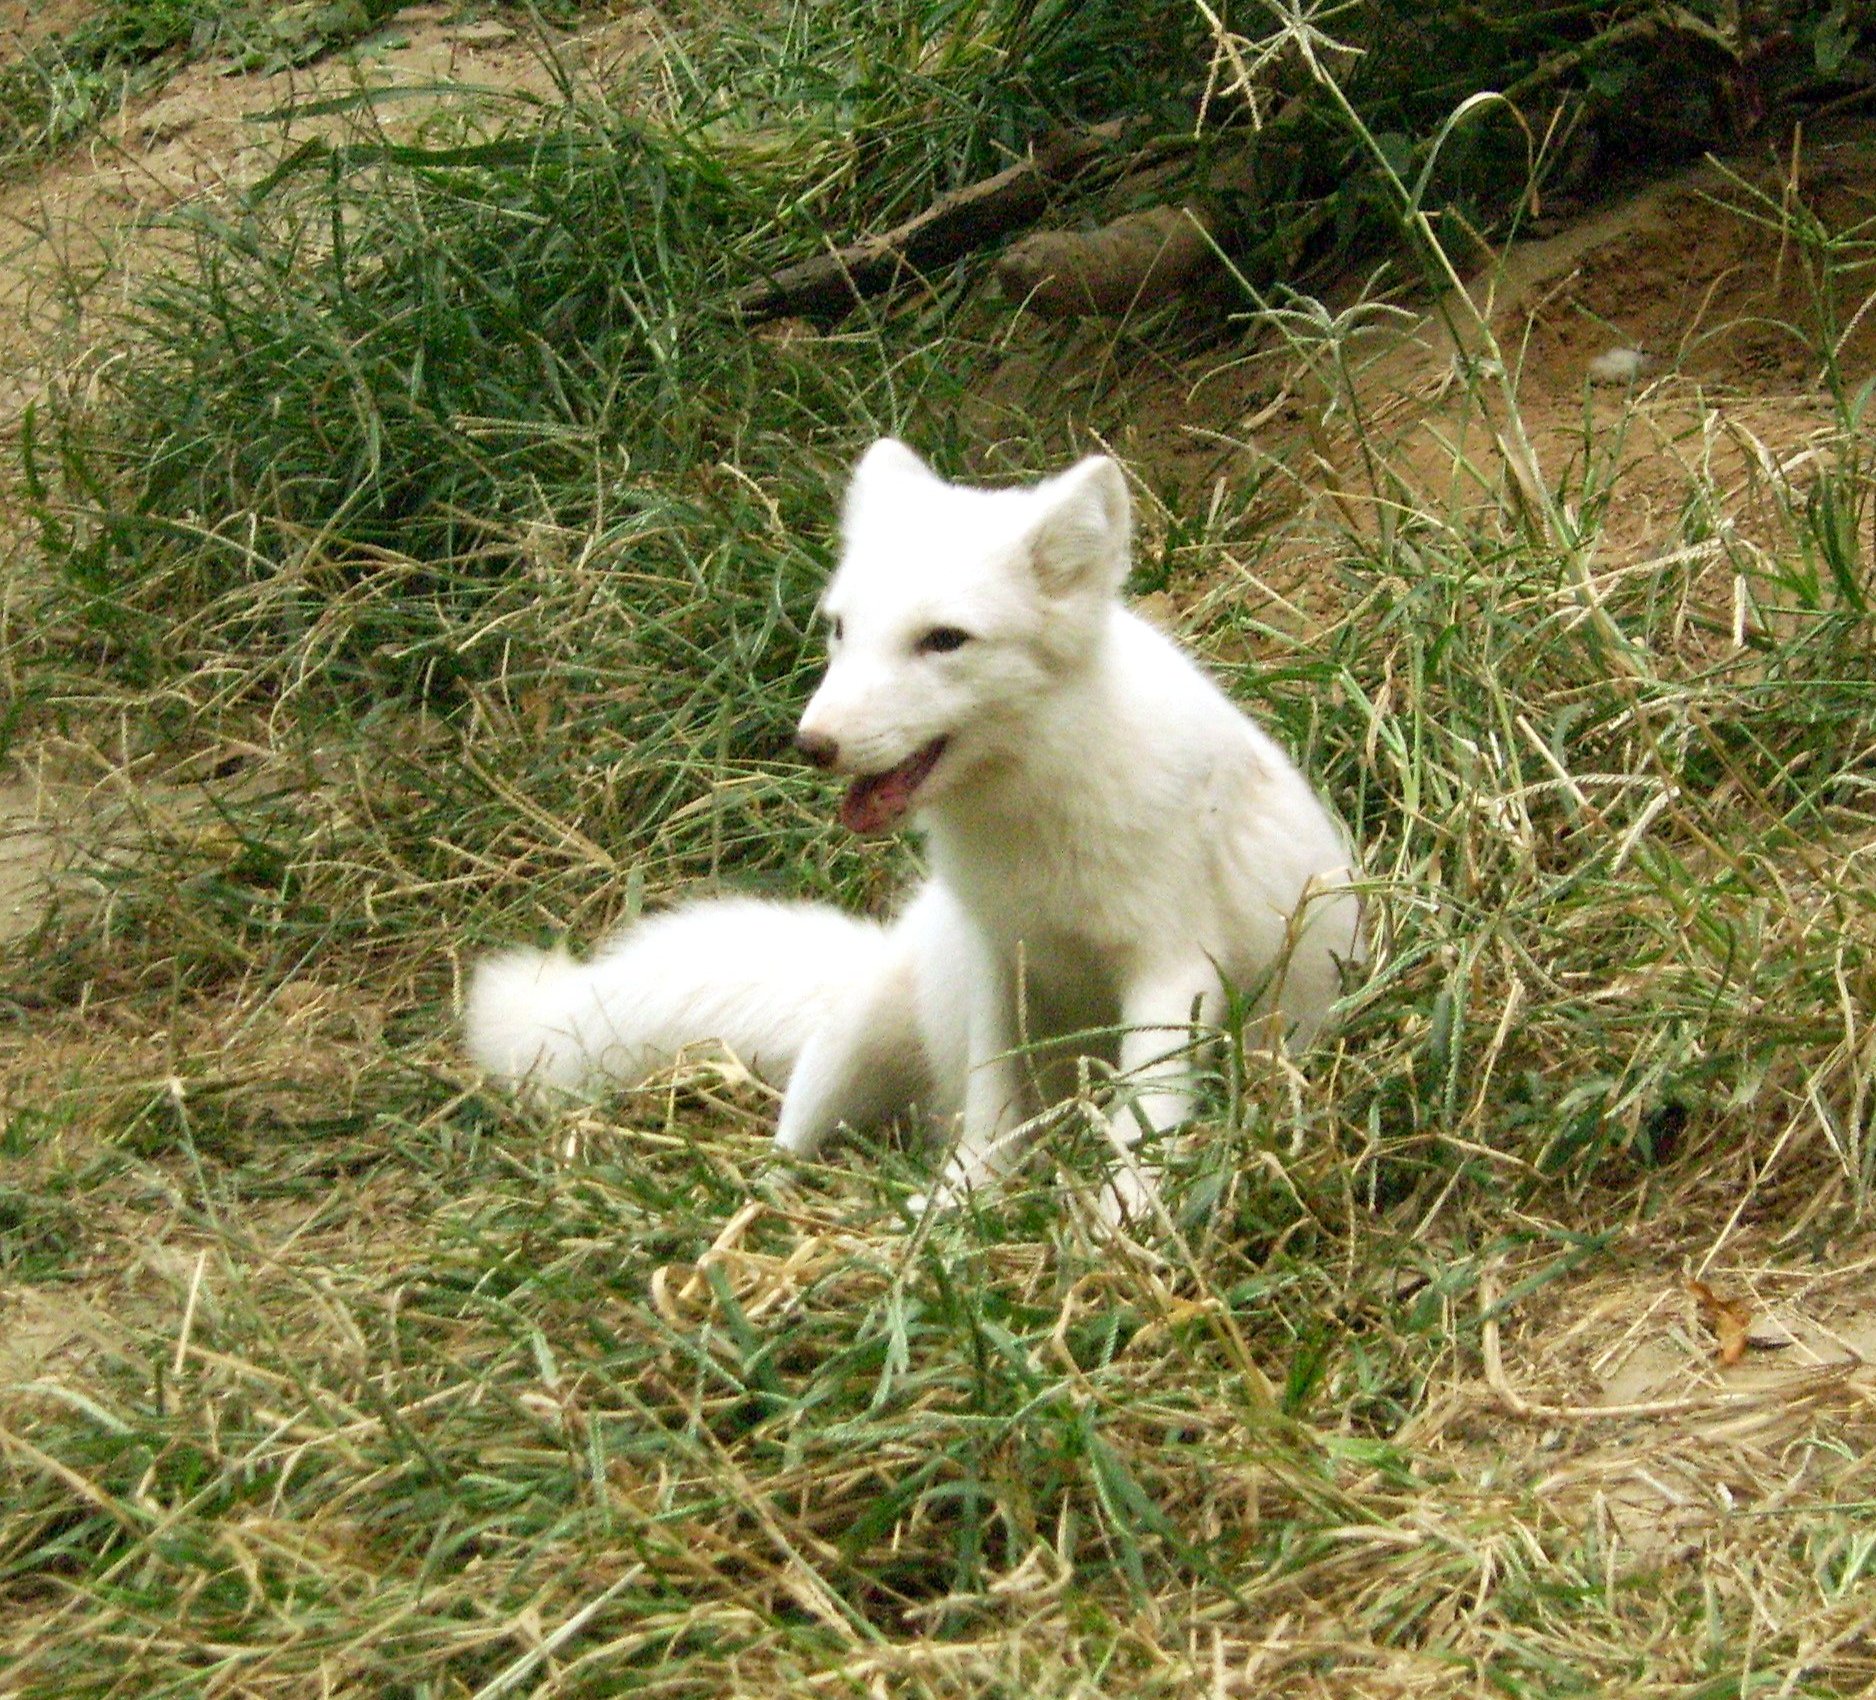 White morph red foxes may be distinguished from Arctic foxes by their 25% greater size, longer muzzles, and longer, pointed ears. This captive example shows the dark pigment of the eyes, nose, and lips that would not occur in an albino. Complete albinism in red foxes is rare and primarily occurs in southern forest zones. Typically, albinism is accompanied by deformations and usually develops in years of insufficient food. Photo taken on October 9, 2006.